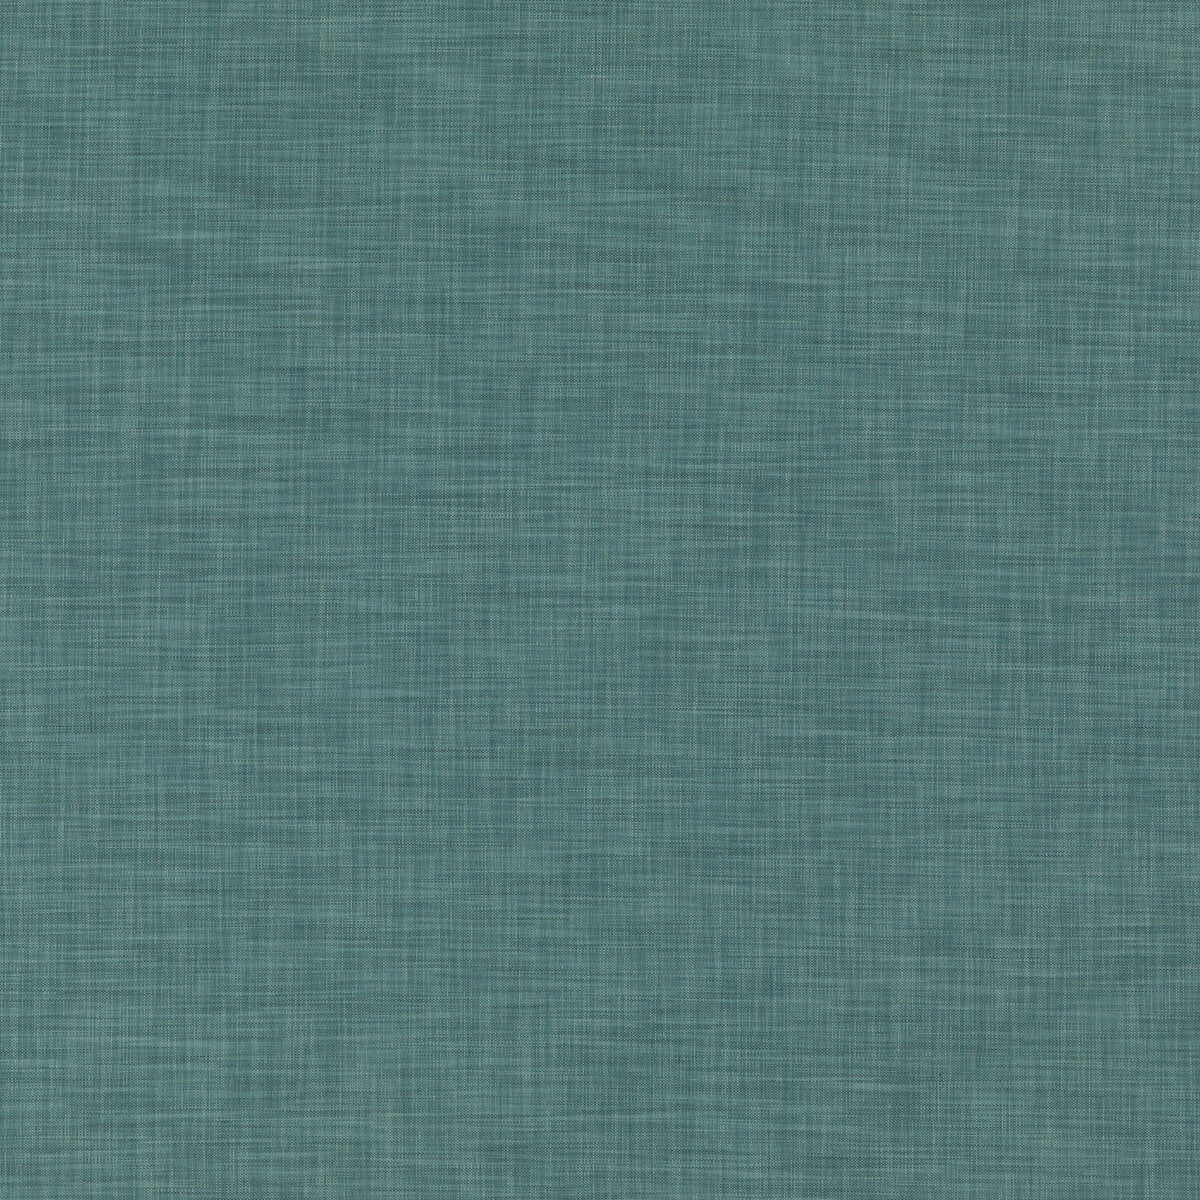 Kalahari fabric in teal color - pattern ED85316.615.0 - by Threads in the Essential Weaves collection